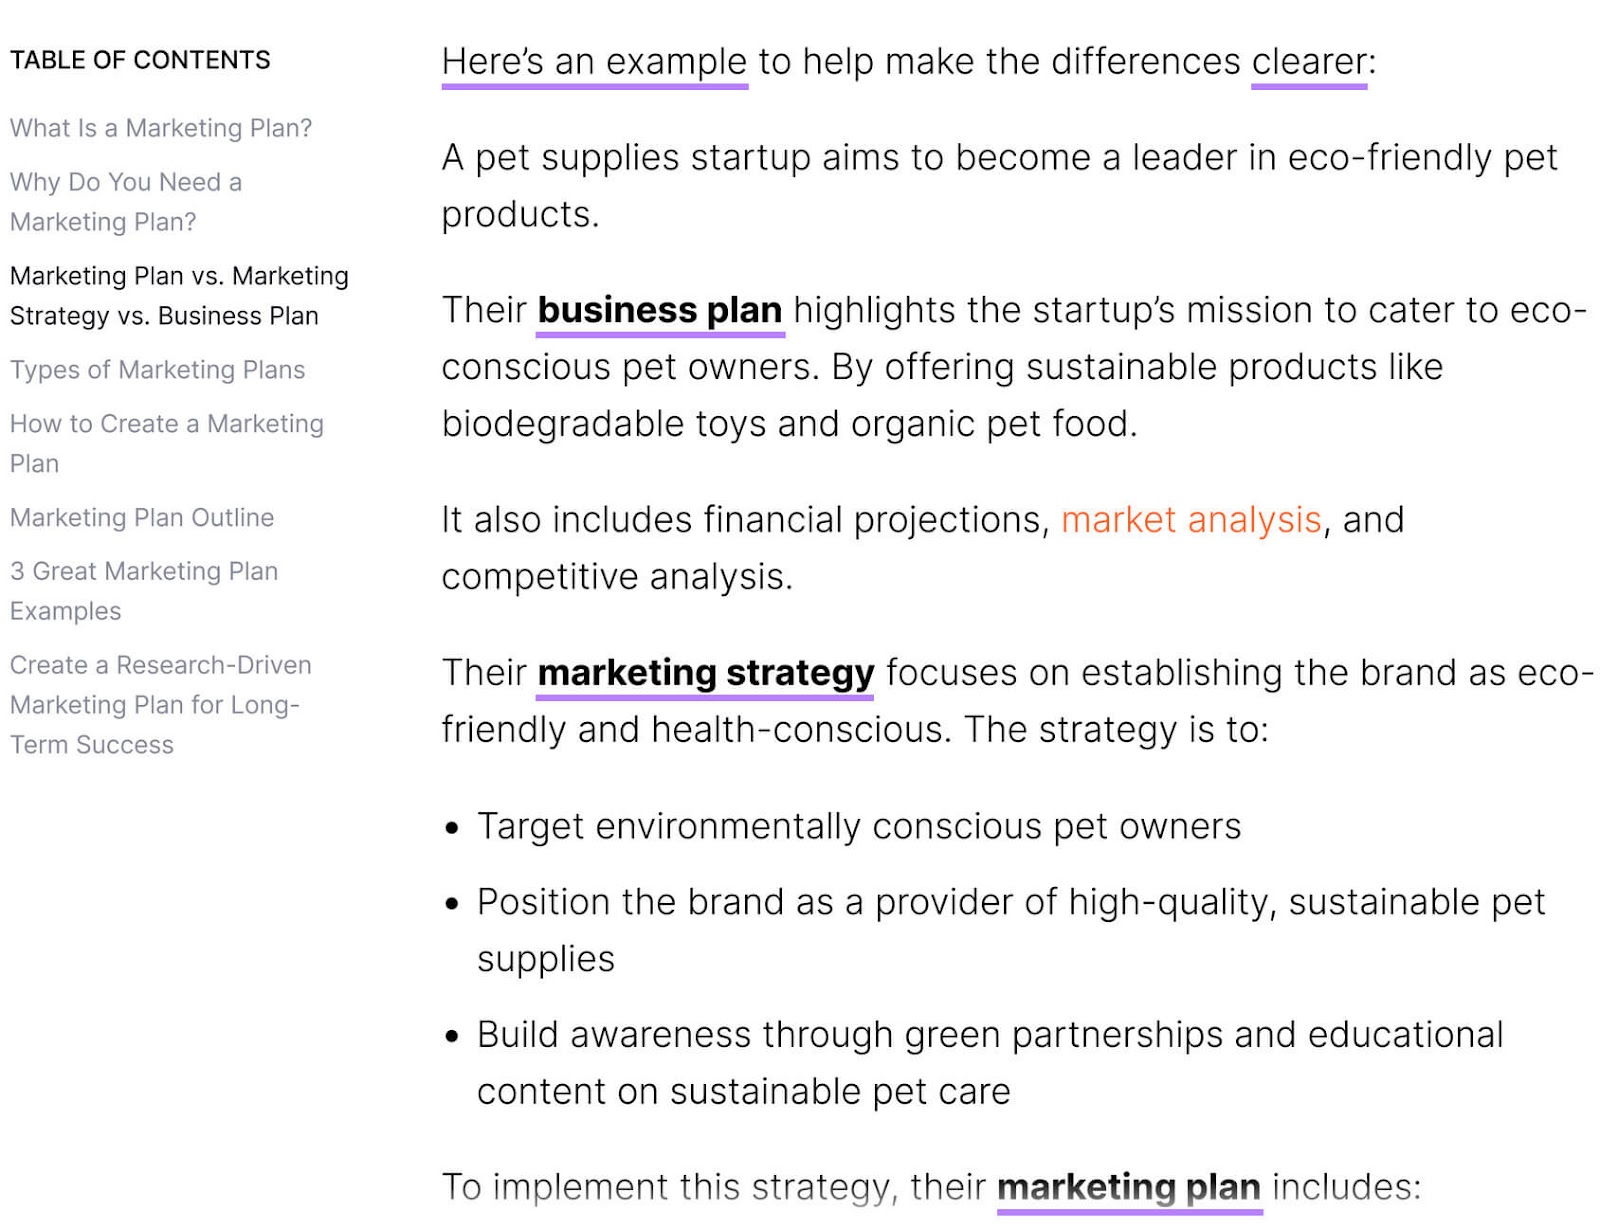 Blog section discussing an example of a pet supplies startup's business plan vs marketing strategy vs marketing plan.